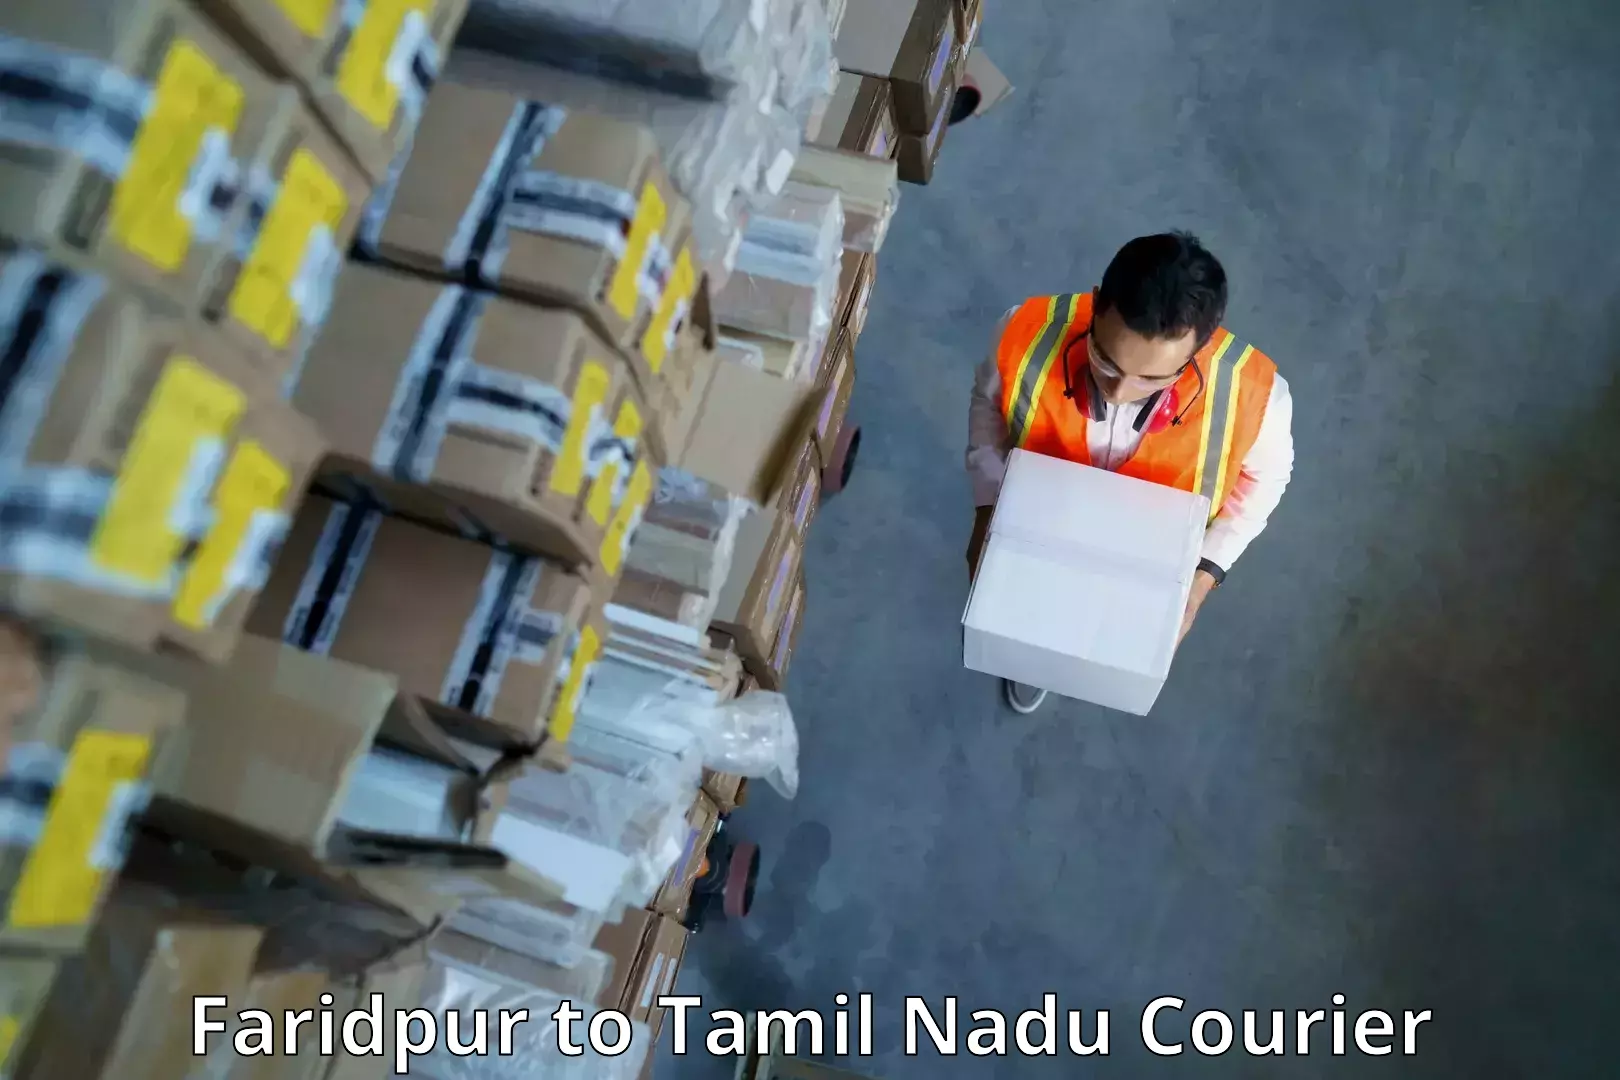 On-call courier service Faridpur to Thondi